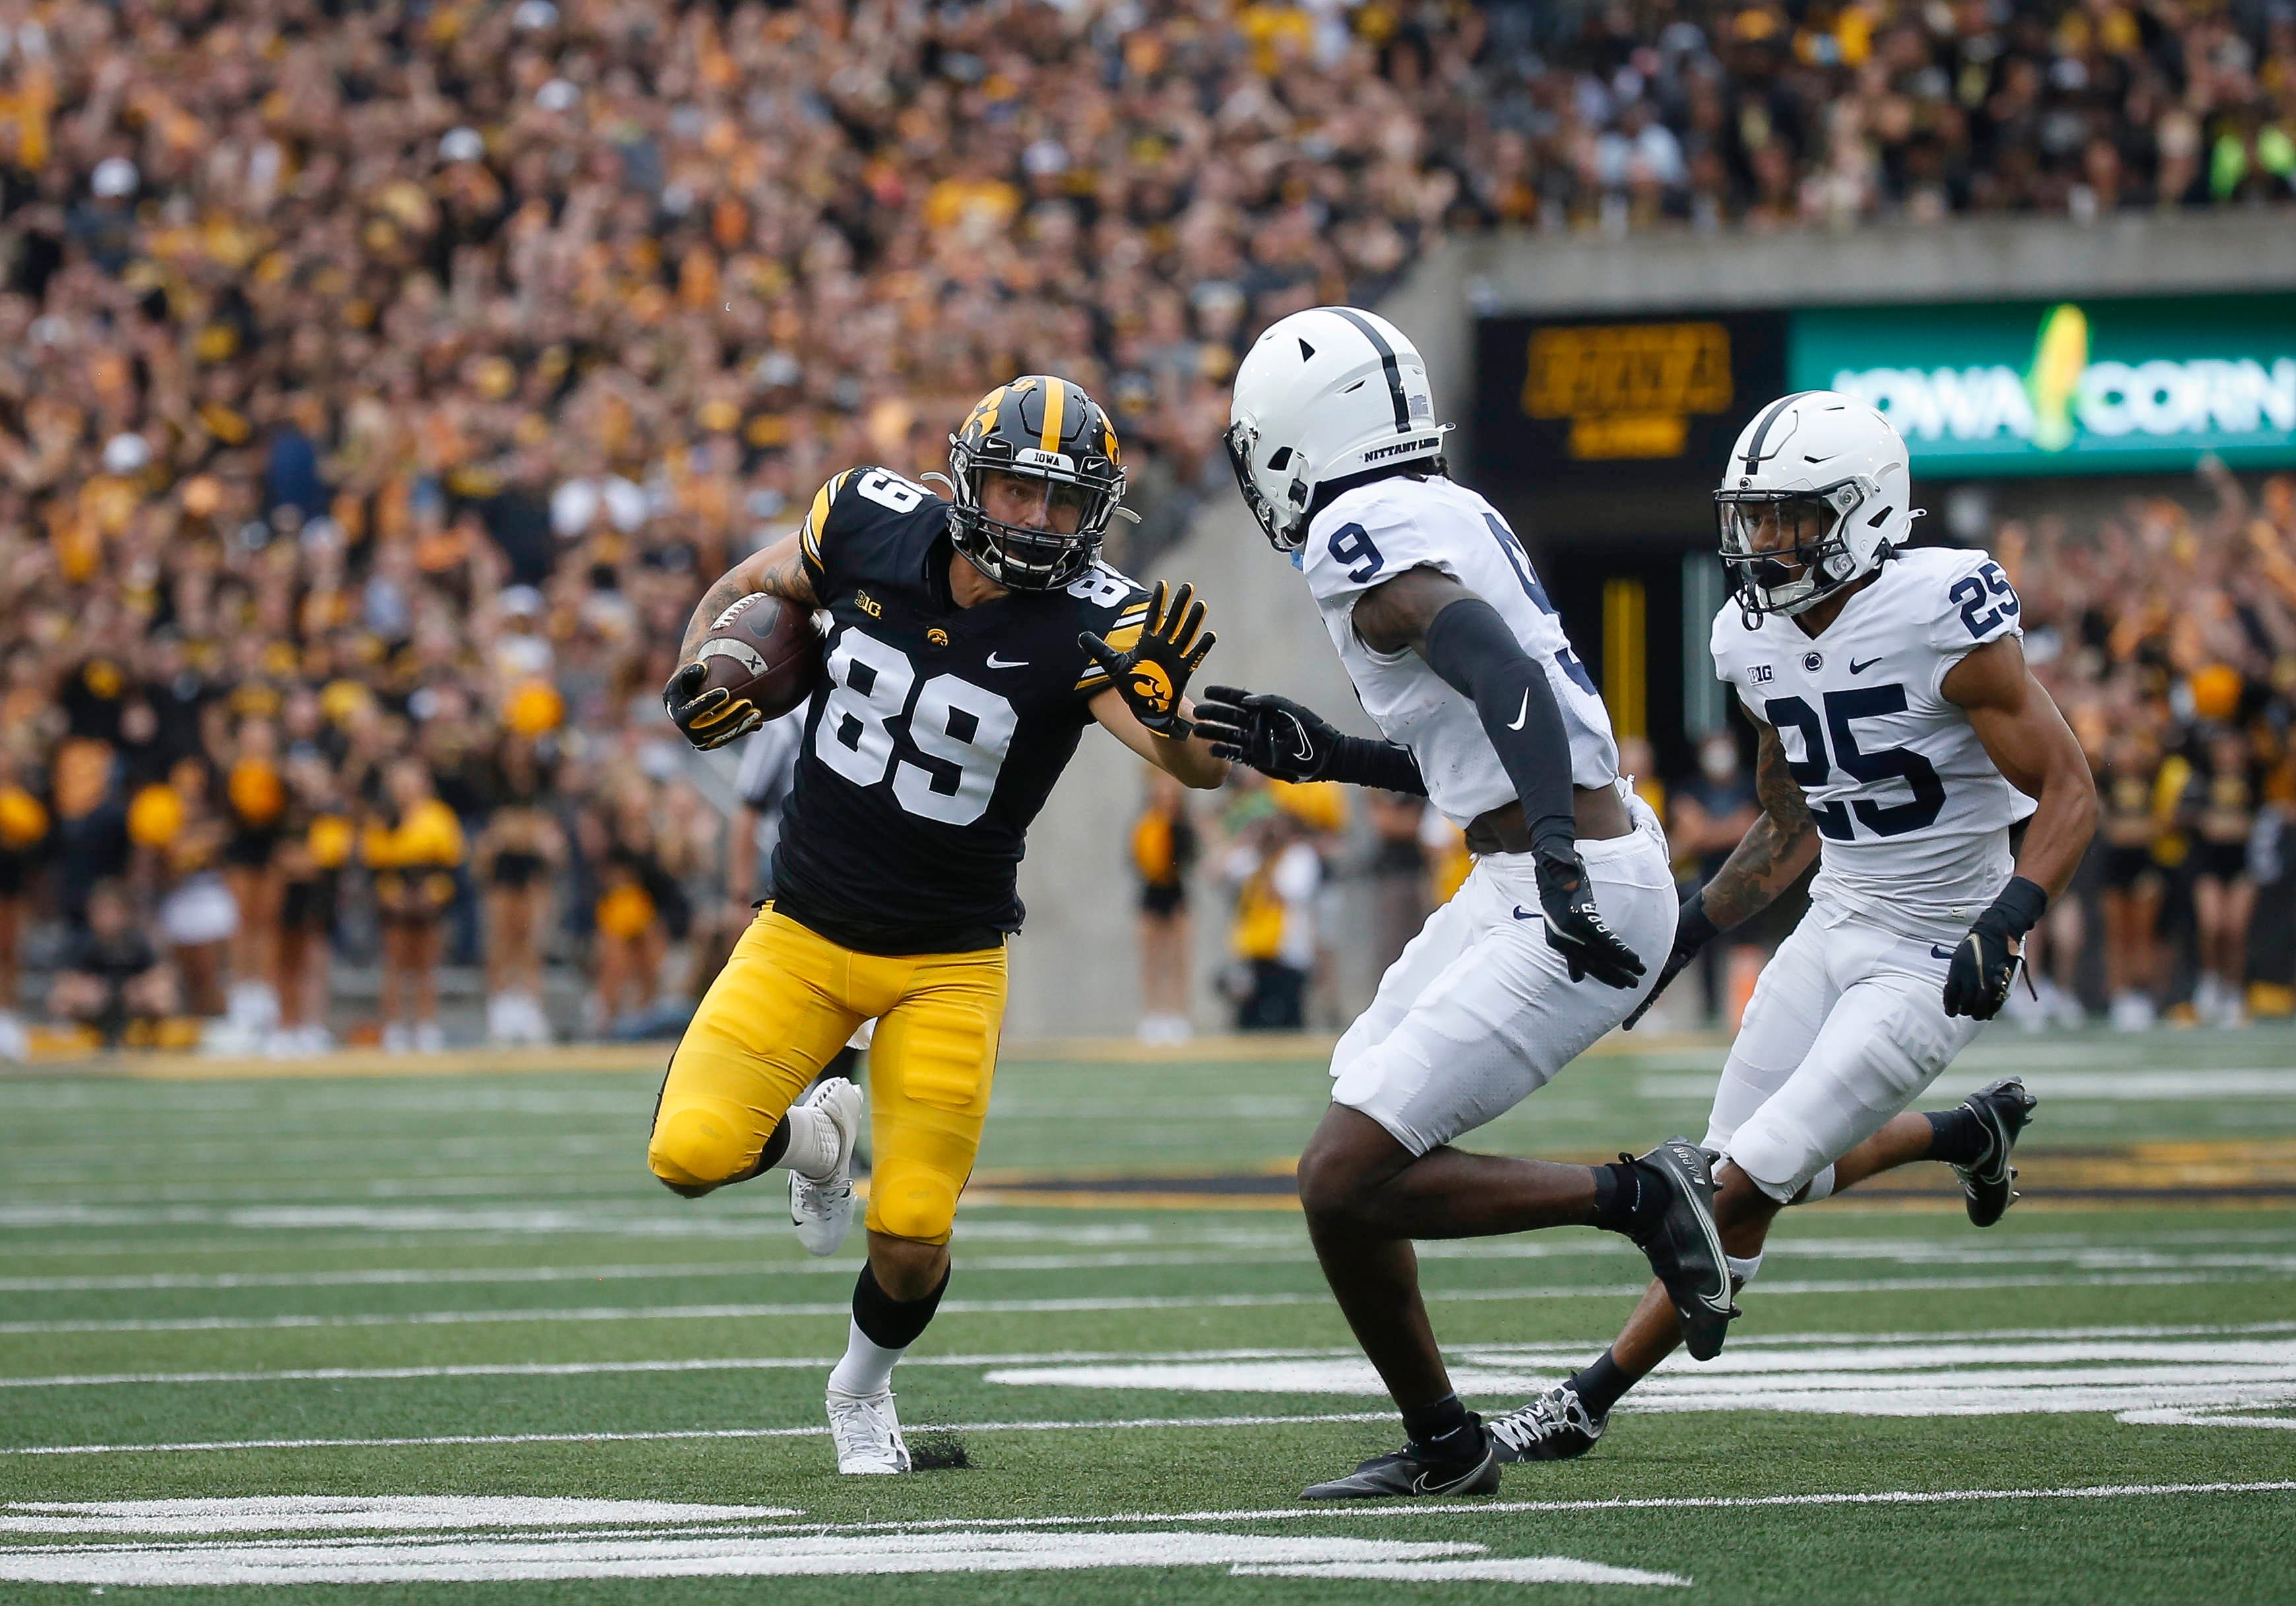 Big Ten Week 4 Preview: Ohio State vs. Notre Dame and Penn State vs. Iowa